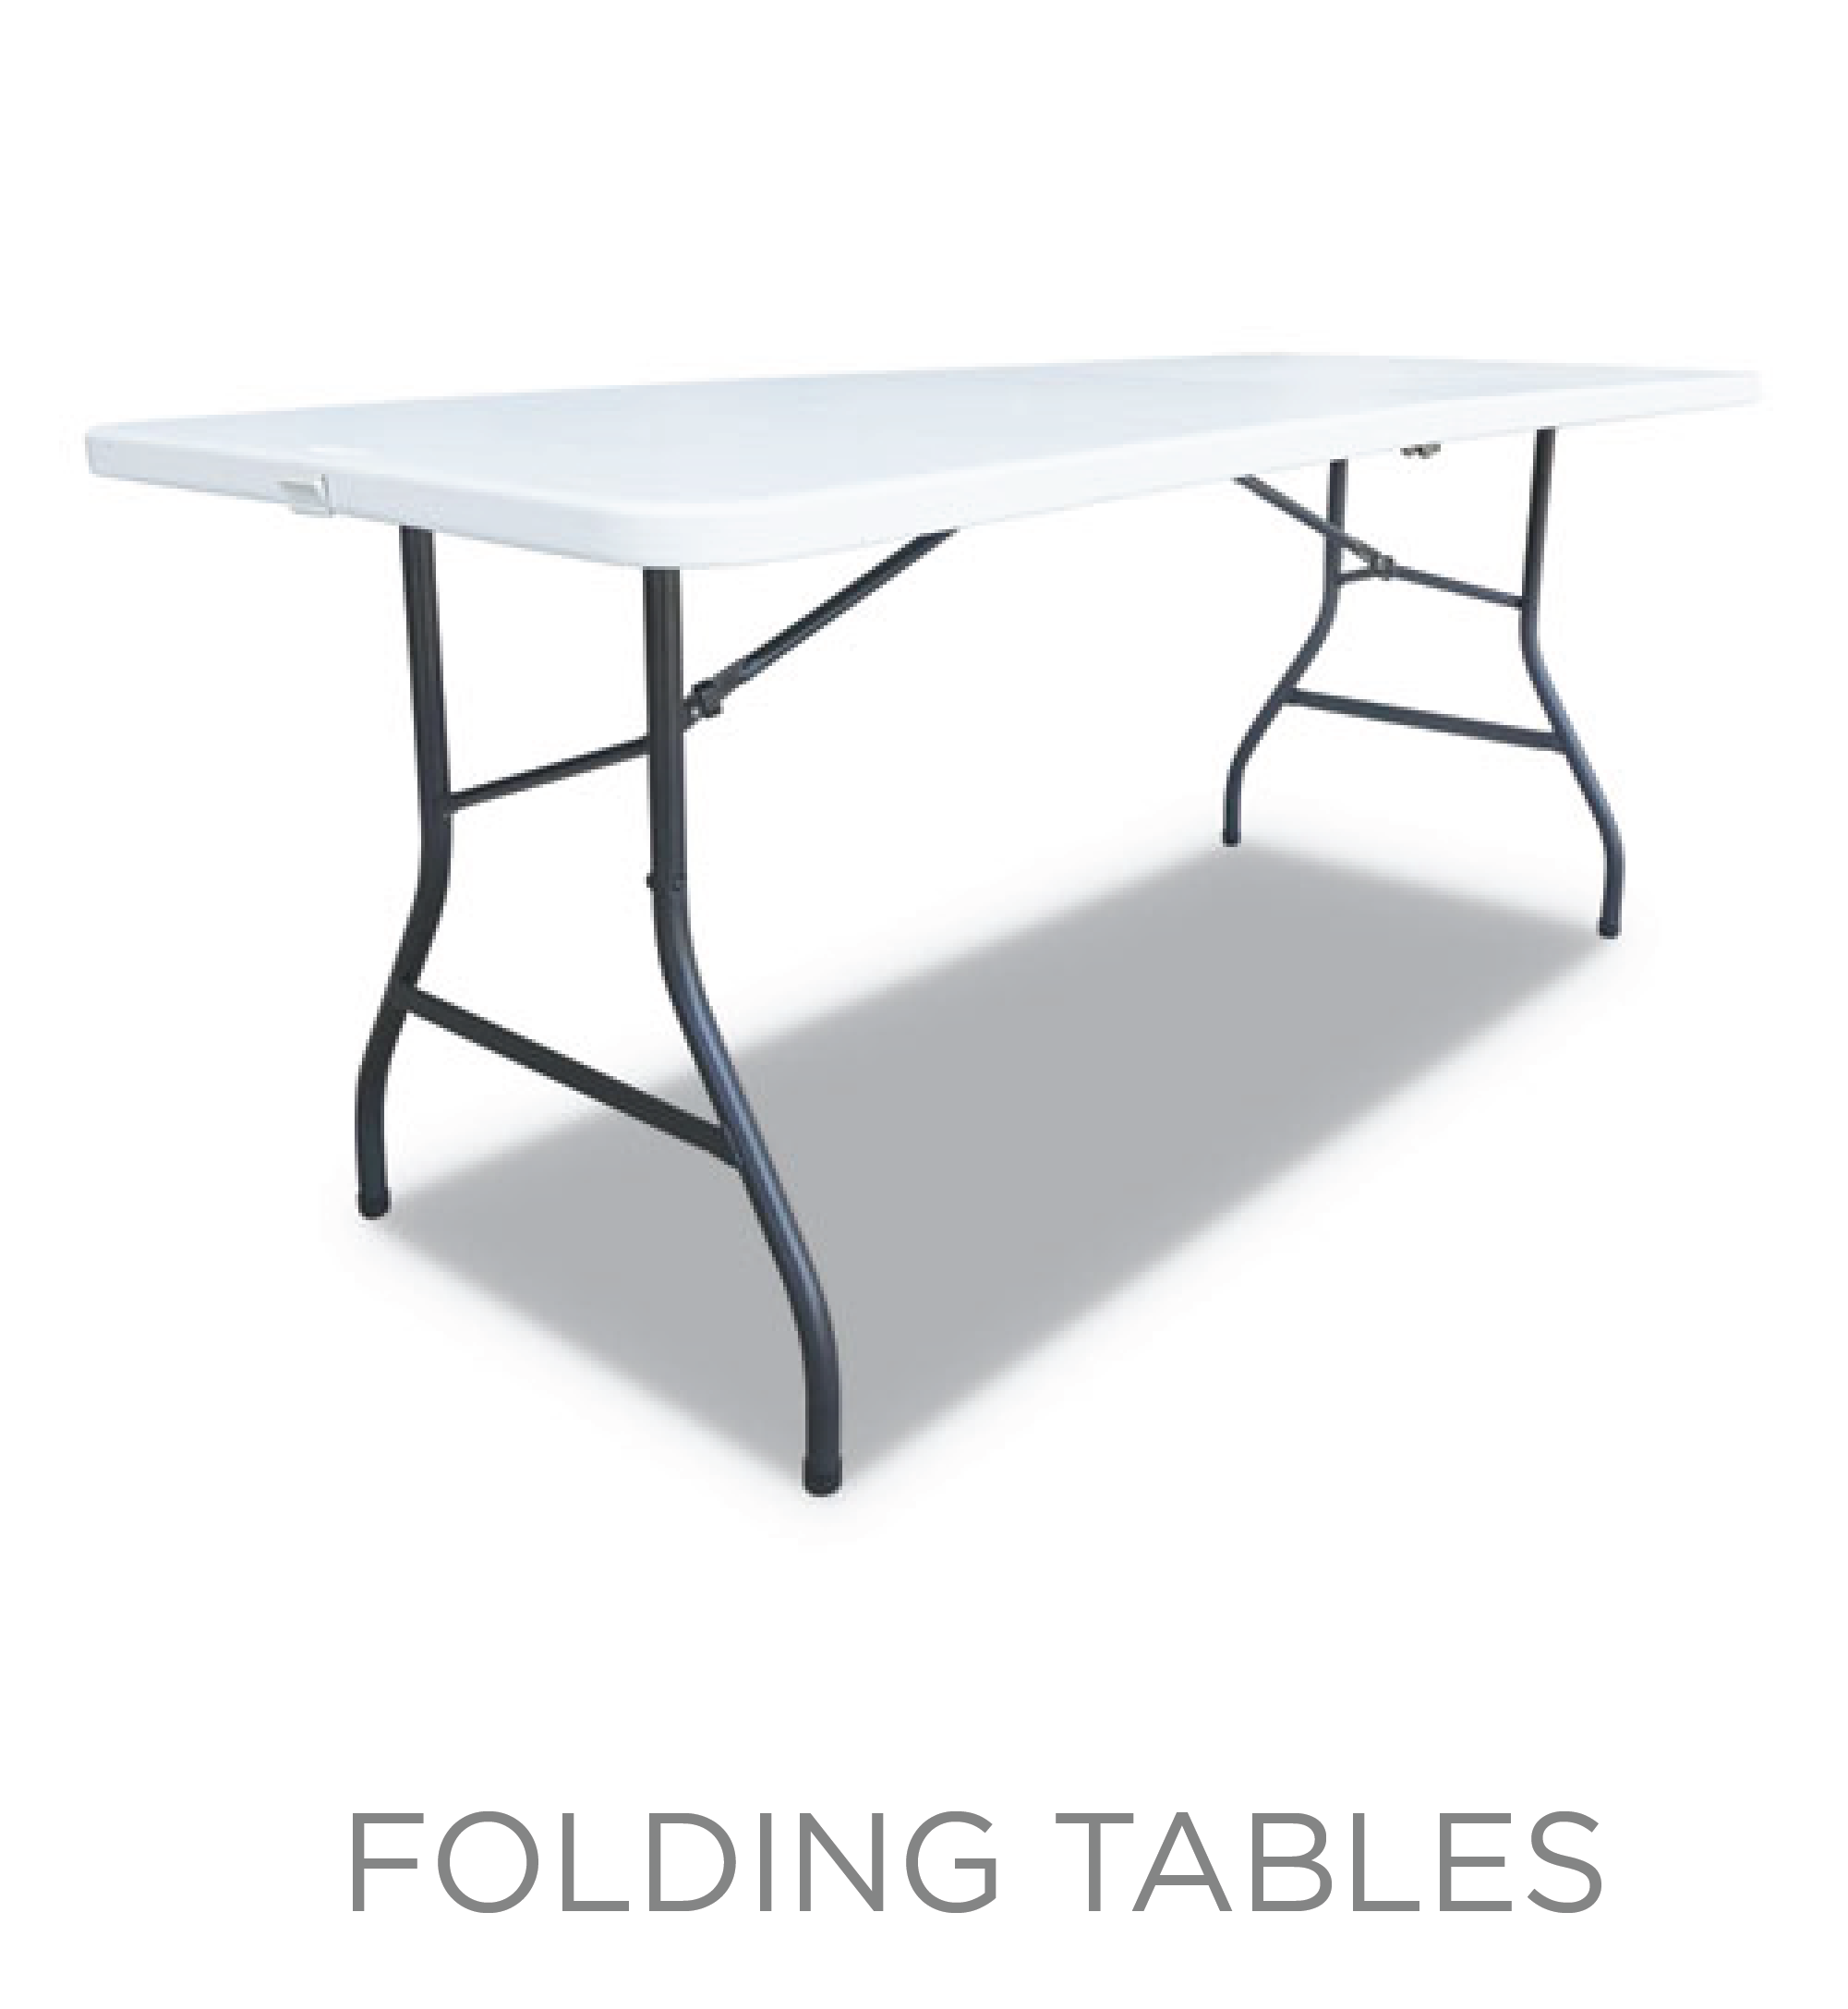 Folding Table- Preparing for the Holidays